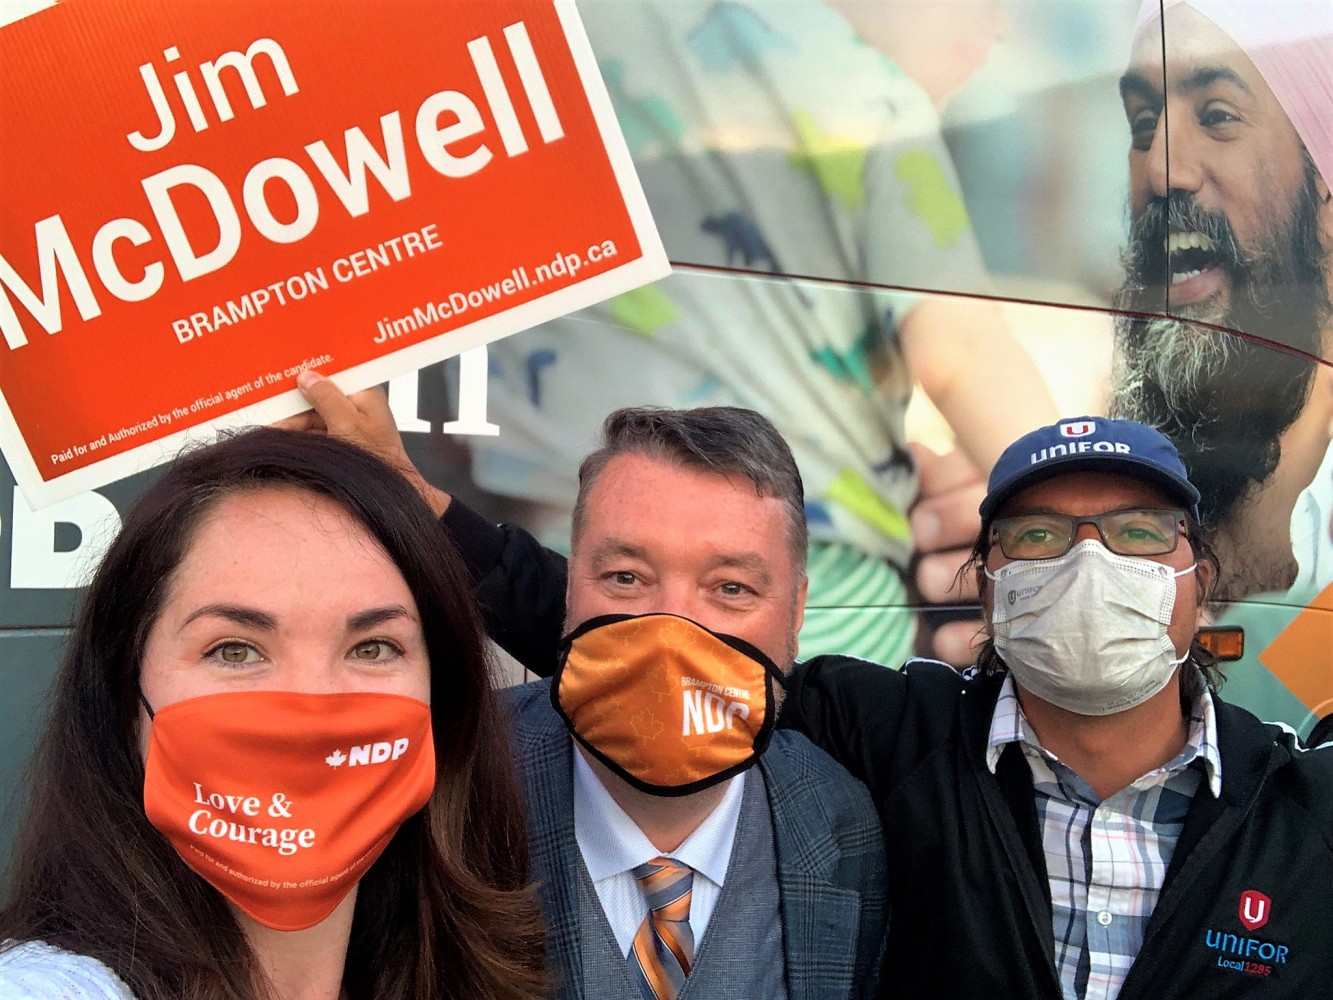 NDP Brampton Centre candidate Jim McDowell vows to fight for workers & healthcare funding